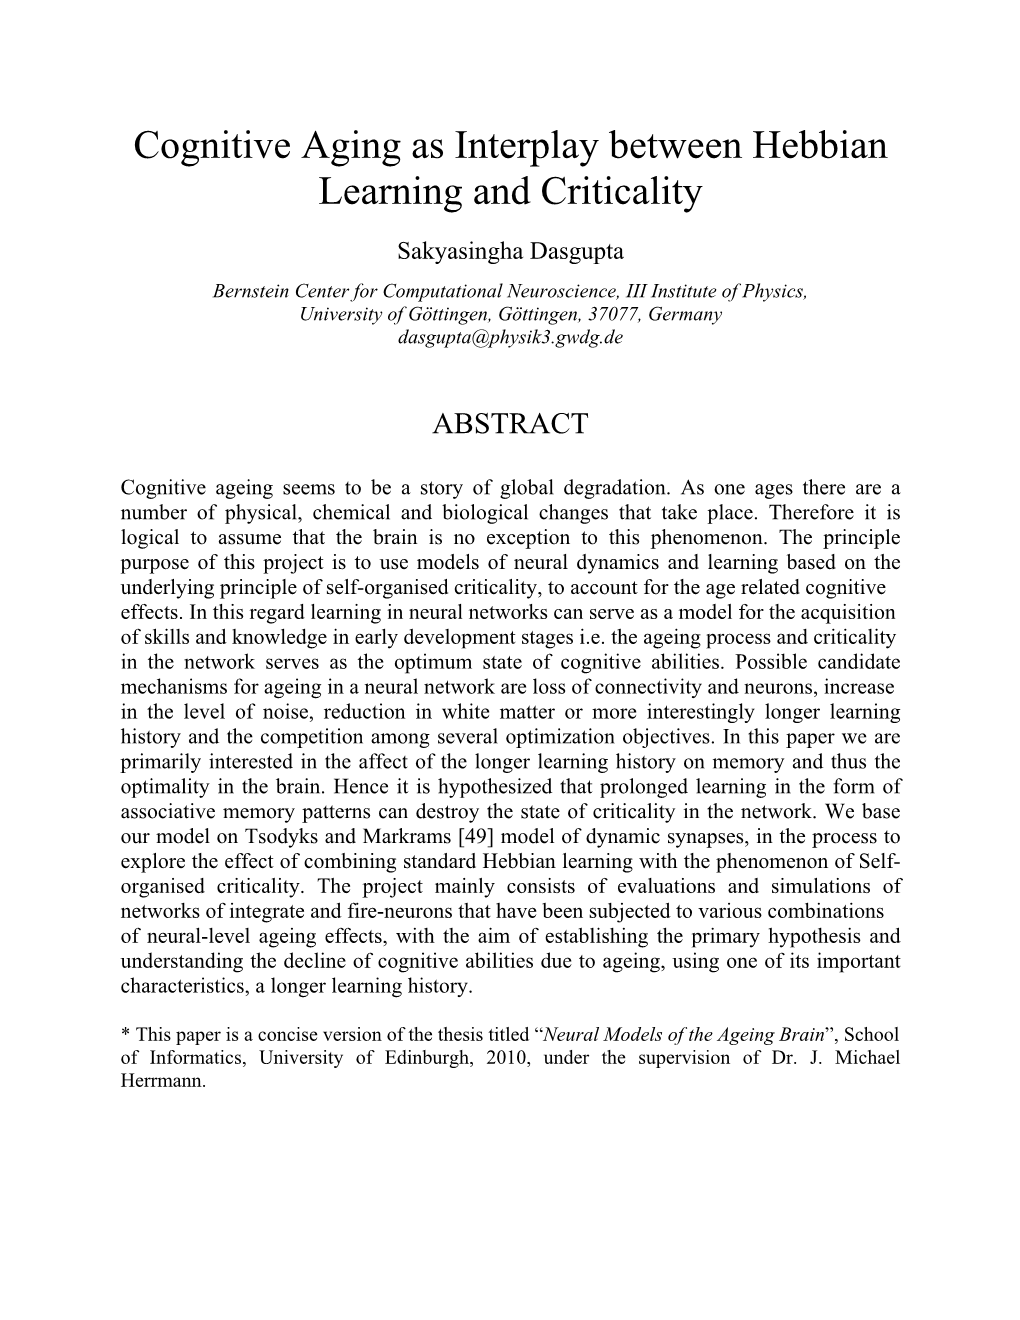 Cognitive Aging As Interplay Between Hebbian Learning and Criticality